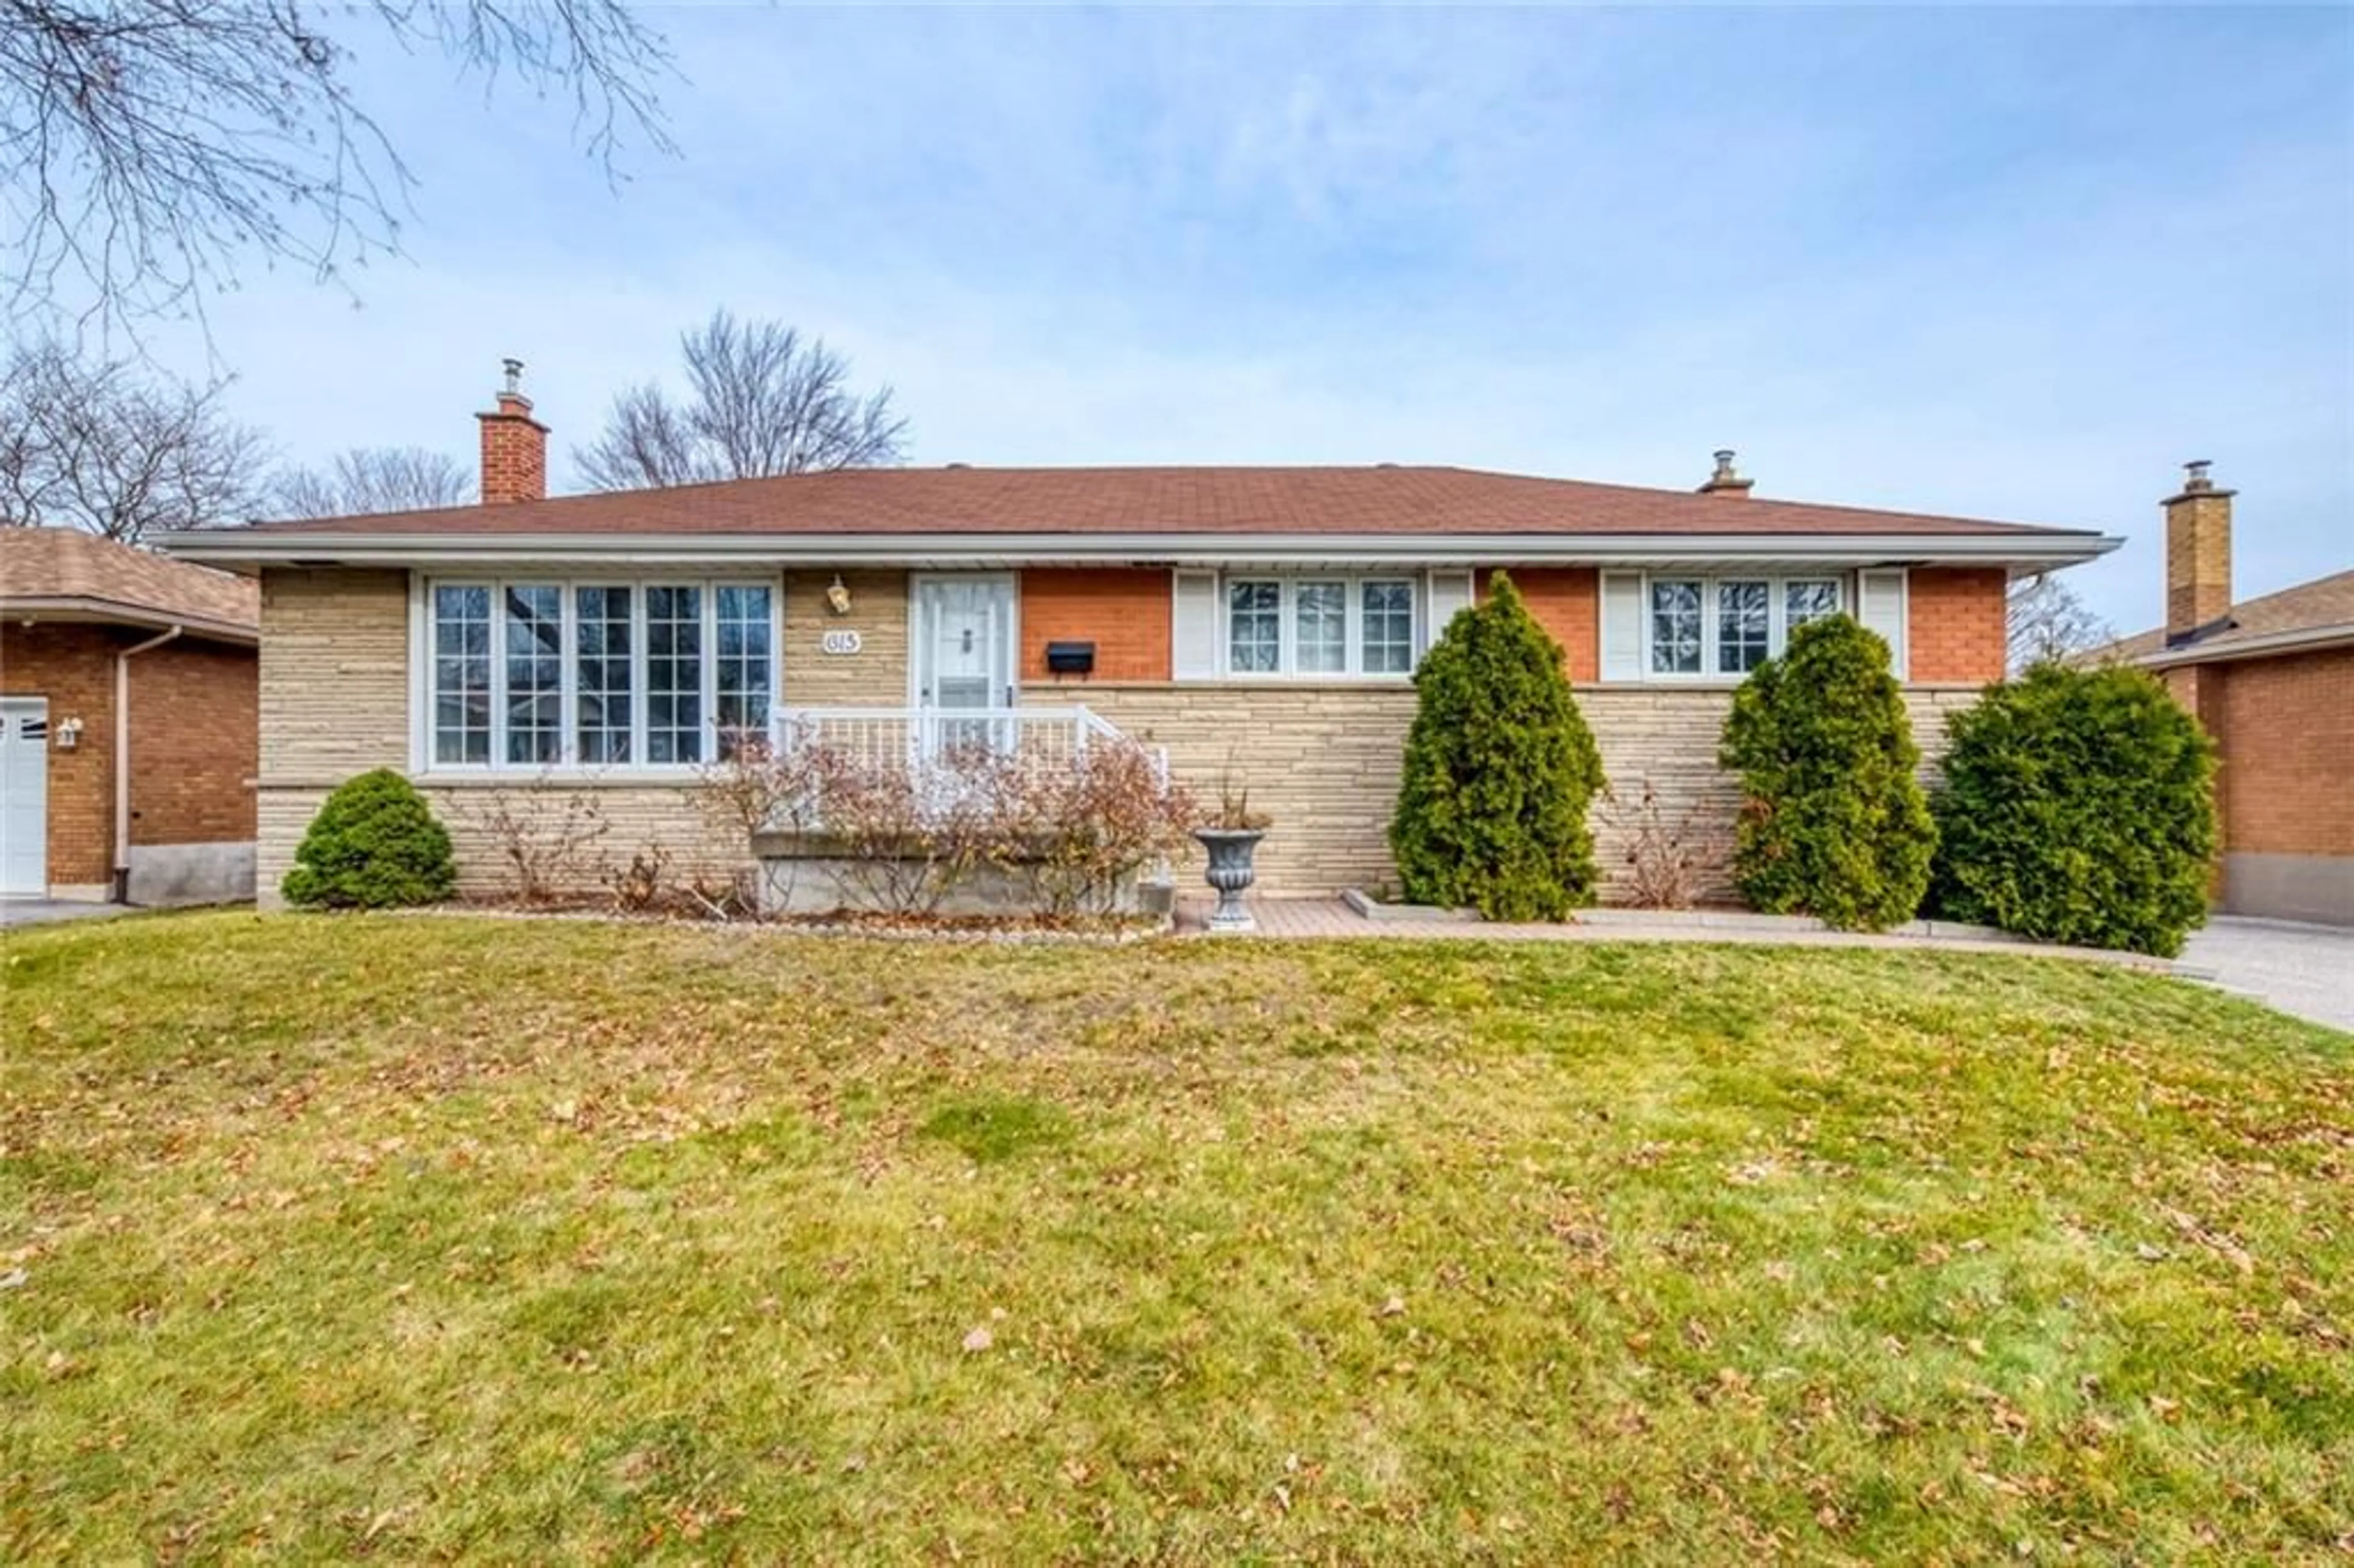 Home with brick exterior material for 615 Cumberland Ave, Burlington Ontario L7N 2X4